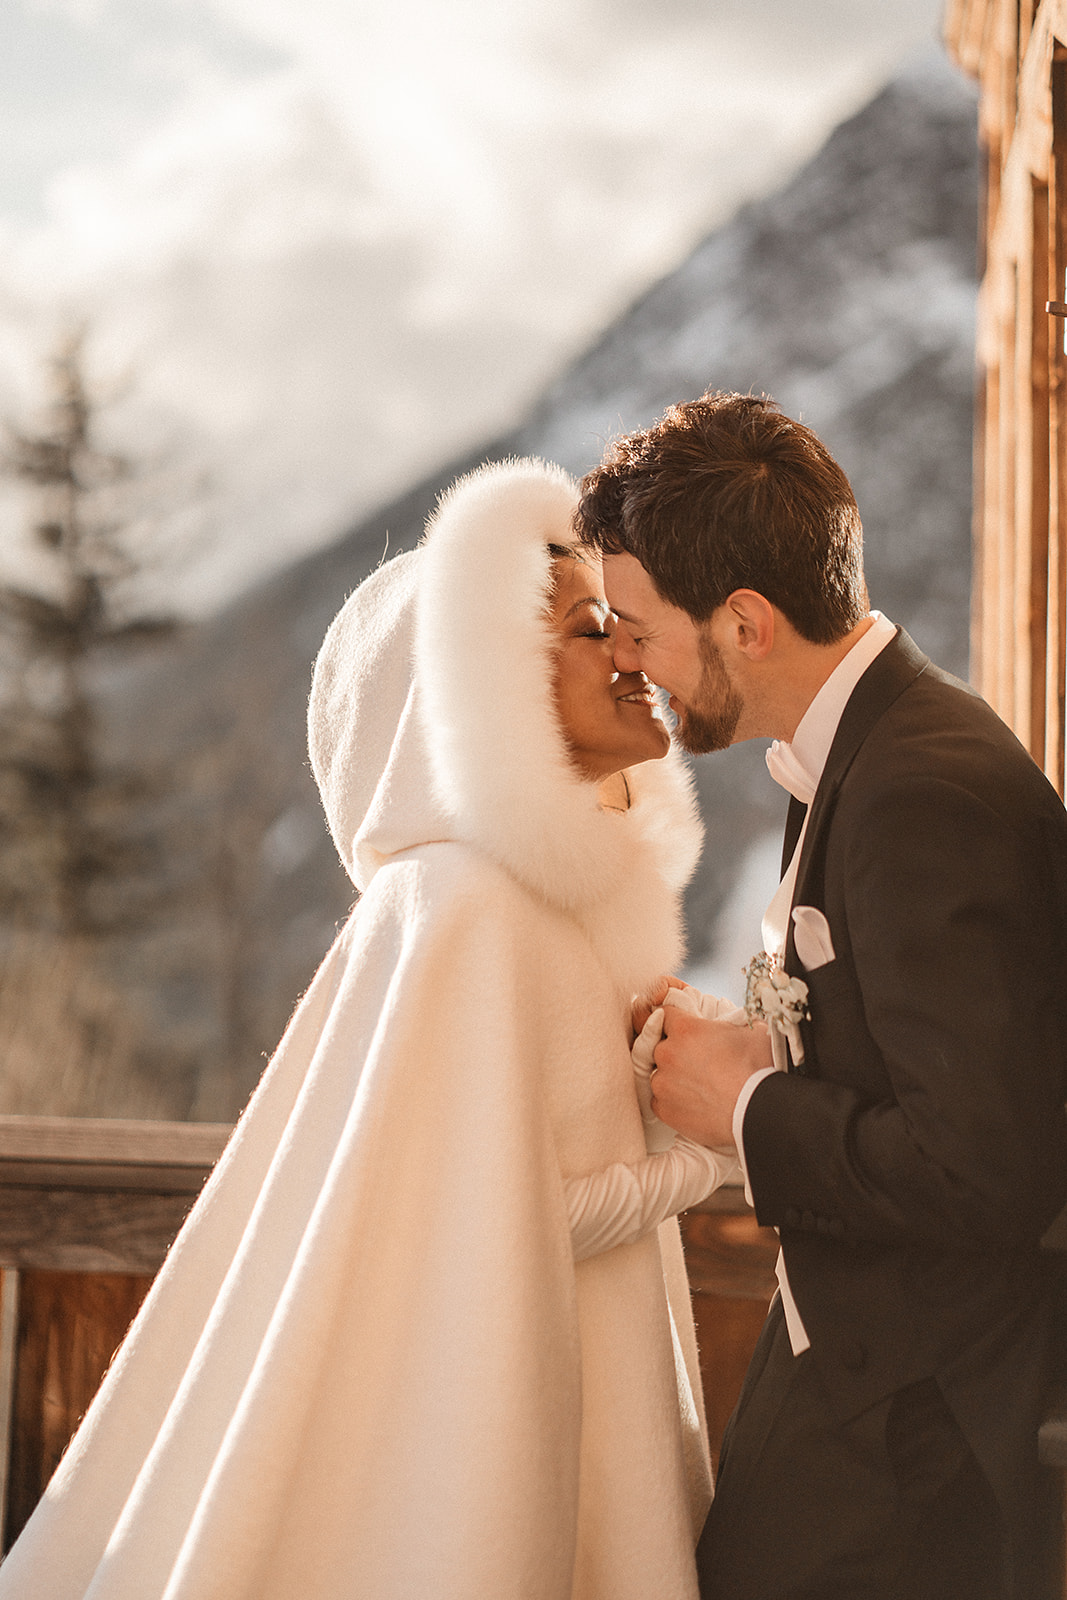 A couple getting married in the Interalpen Hotel in the Tyrol in Austria